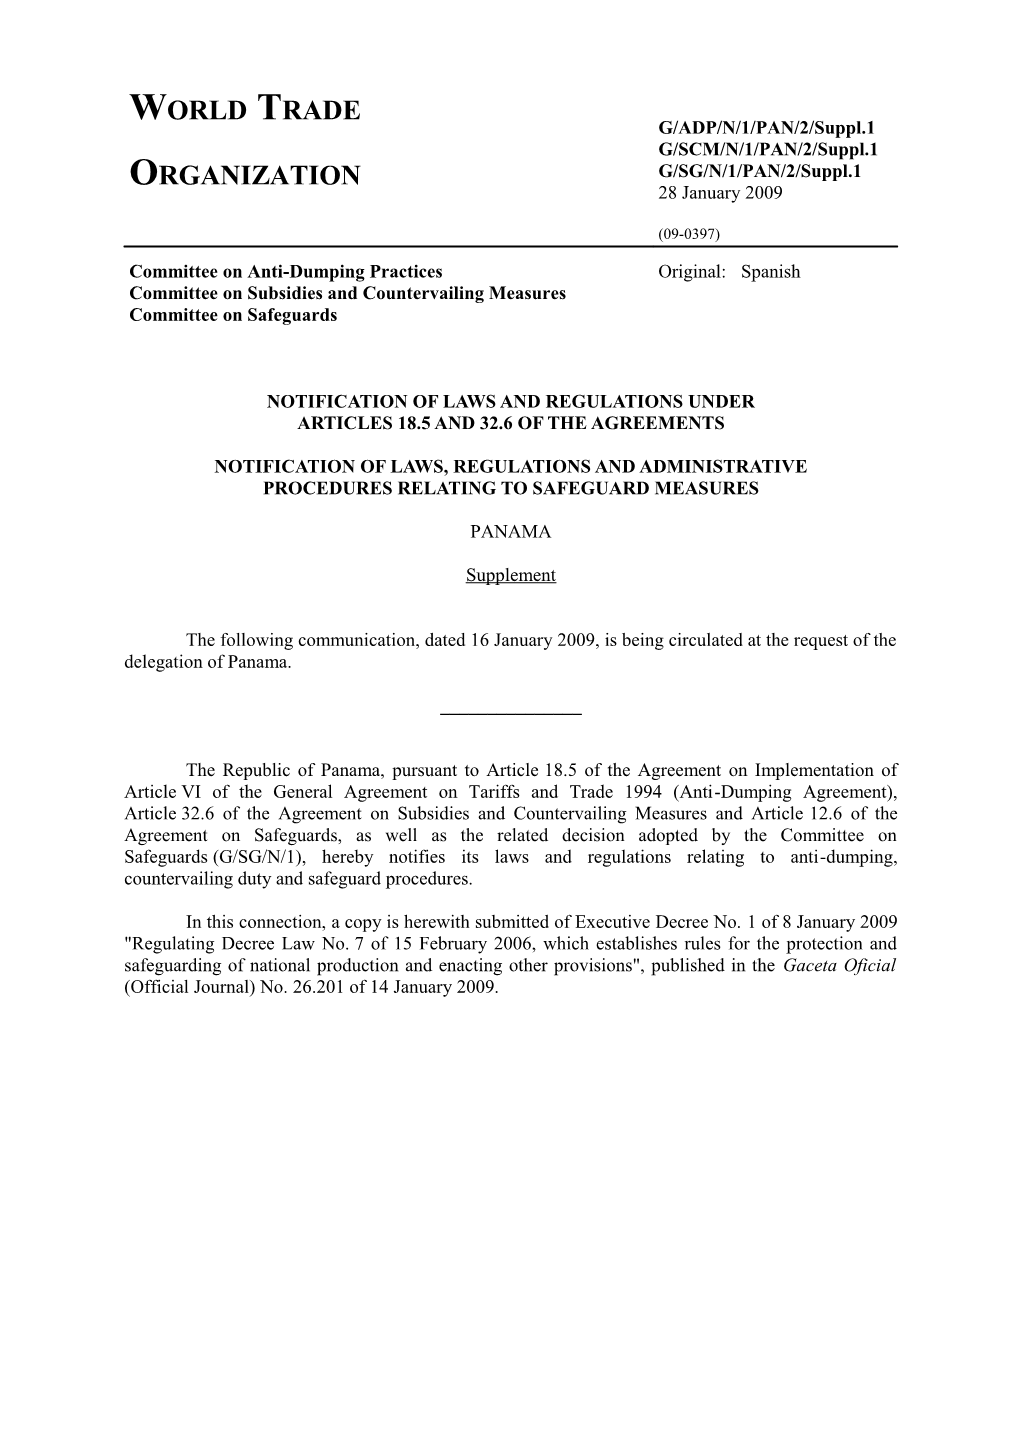 Notification of Laws and Regulations Under Articles 18.5 and 32.6 of the Agreements